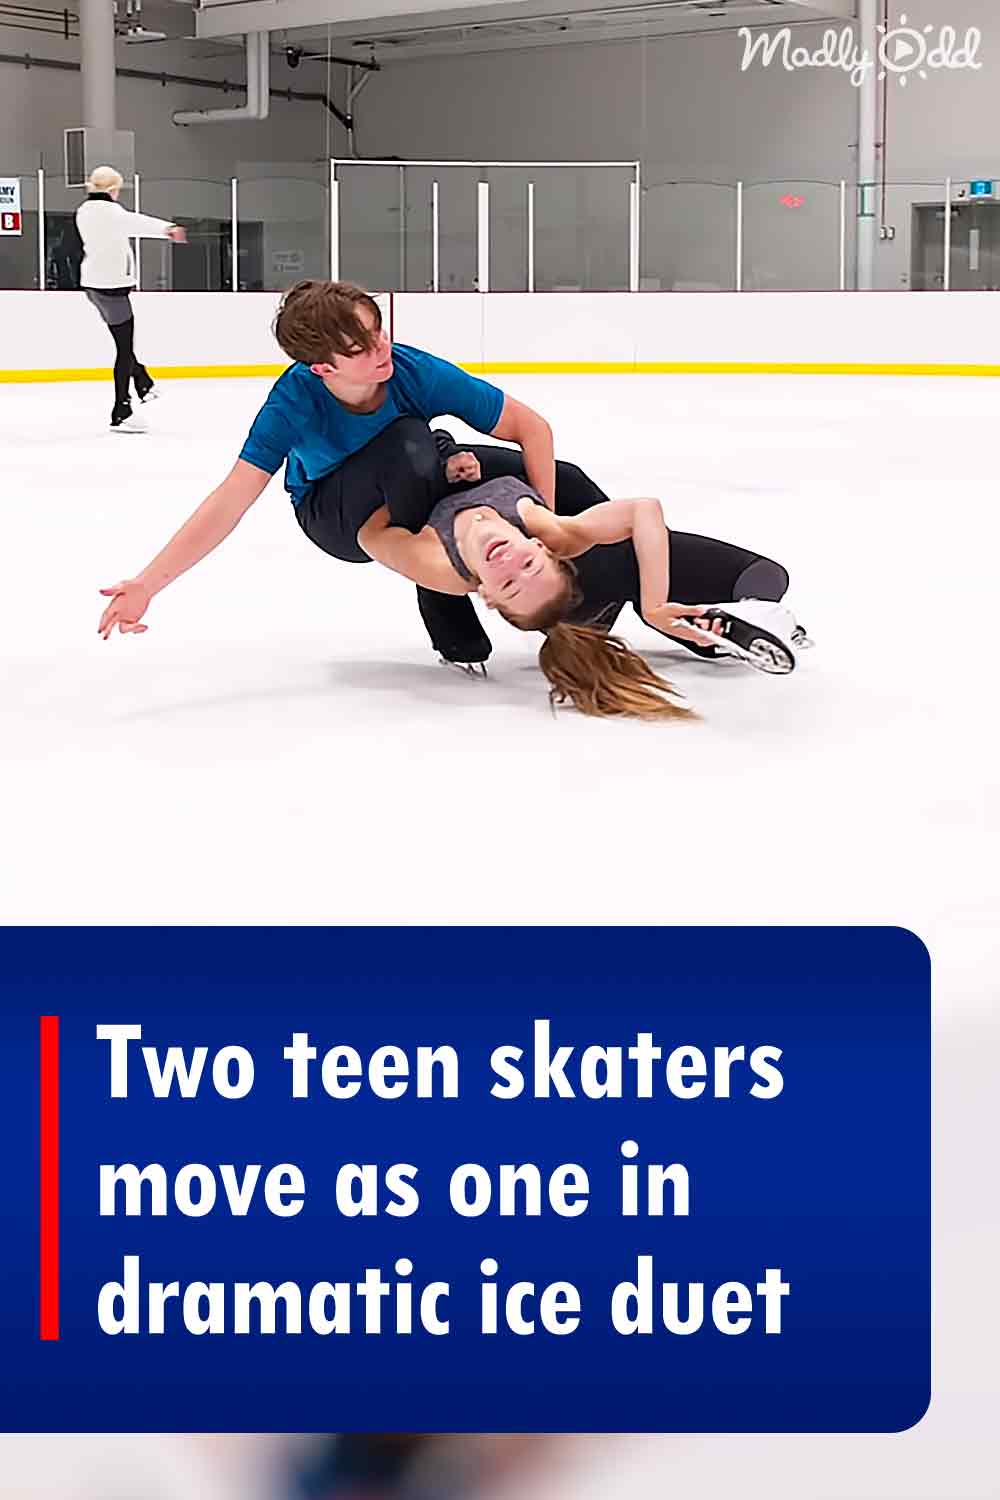 Two teen skaters move as one in dramatic ice duet